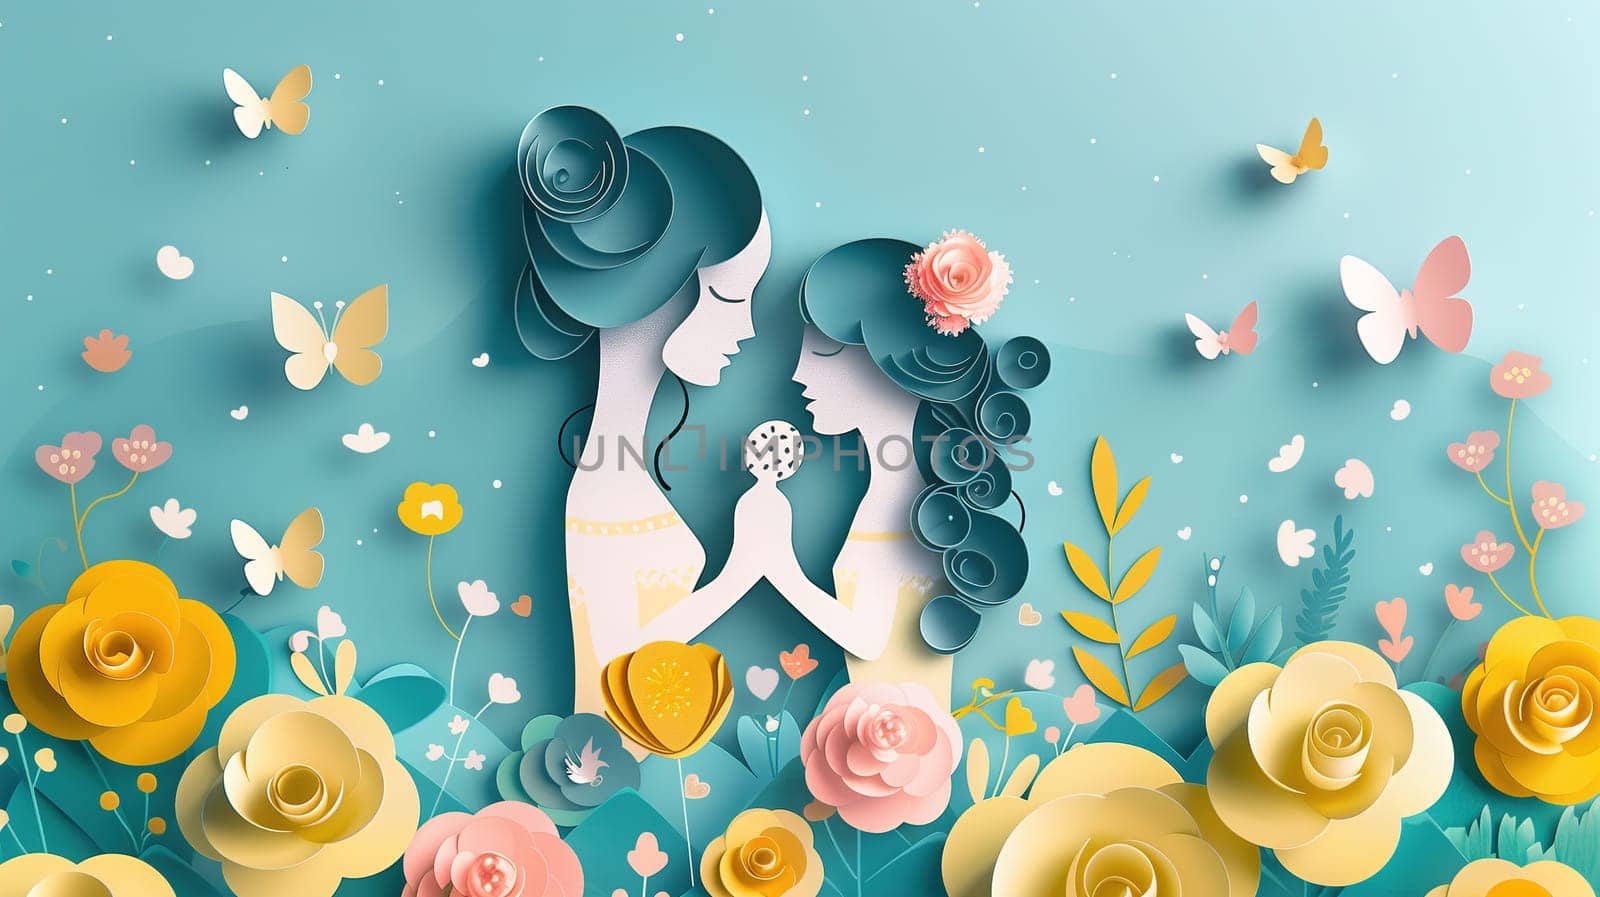 A paper cut showing a couple sharing a kiss amidst a vibrant field of colorful flowers. The intricate details capture the romantic moment in a whimsical setting.